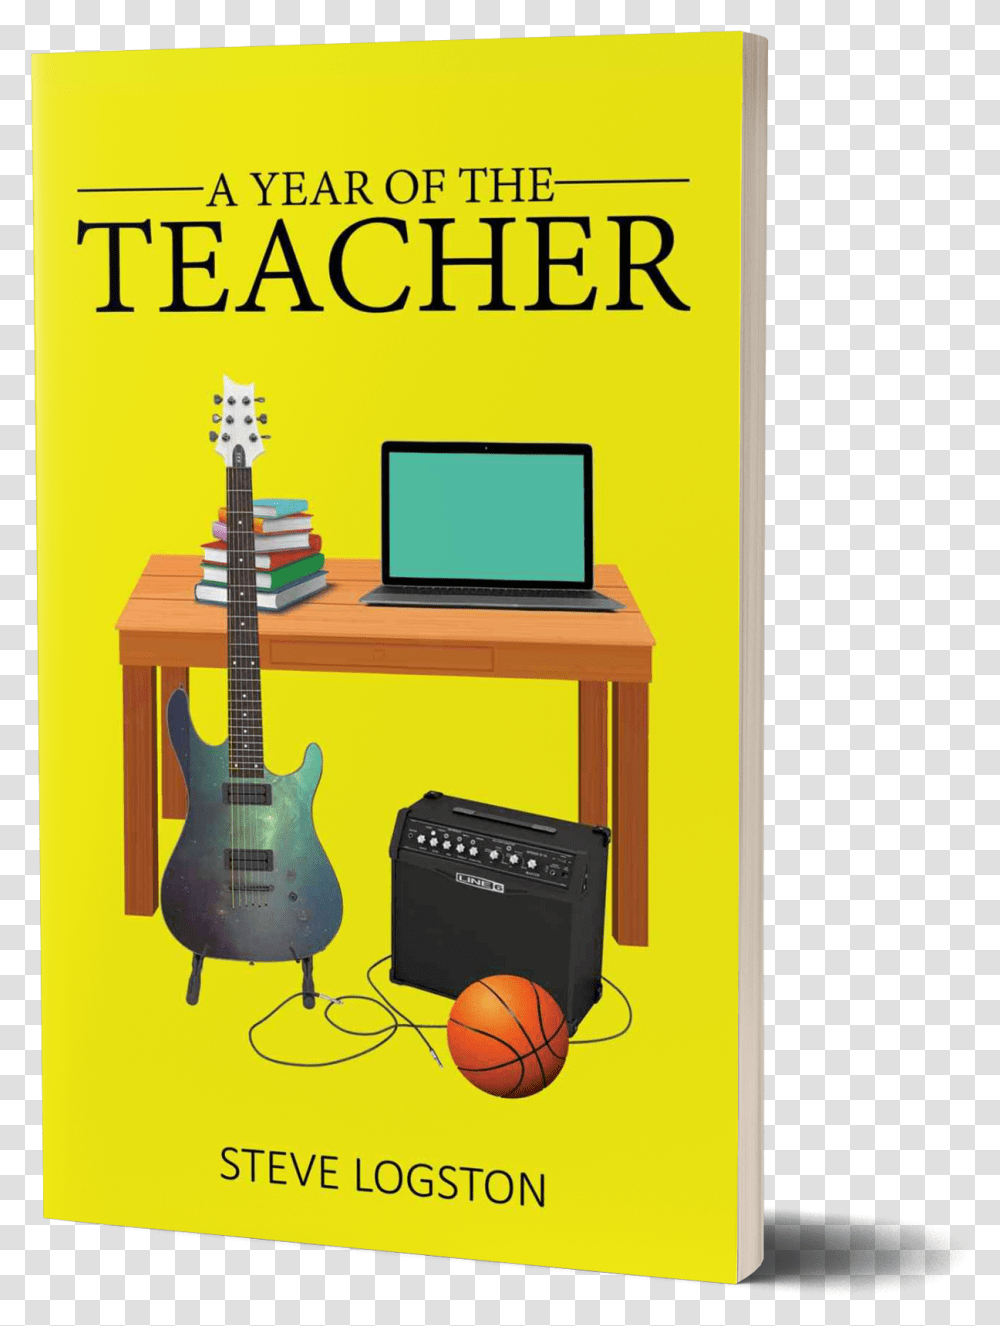 Steve Logston Hosted His Book Signing Event Basketball, Guitar, Leisure Activities, Musical Instrument, Laptop Transparent Png